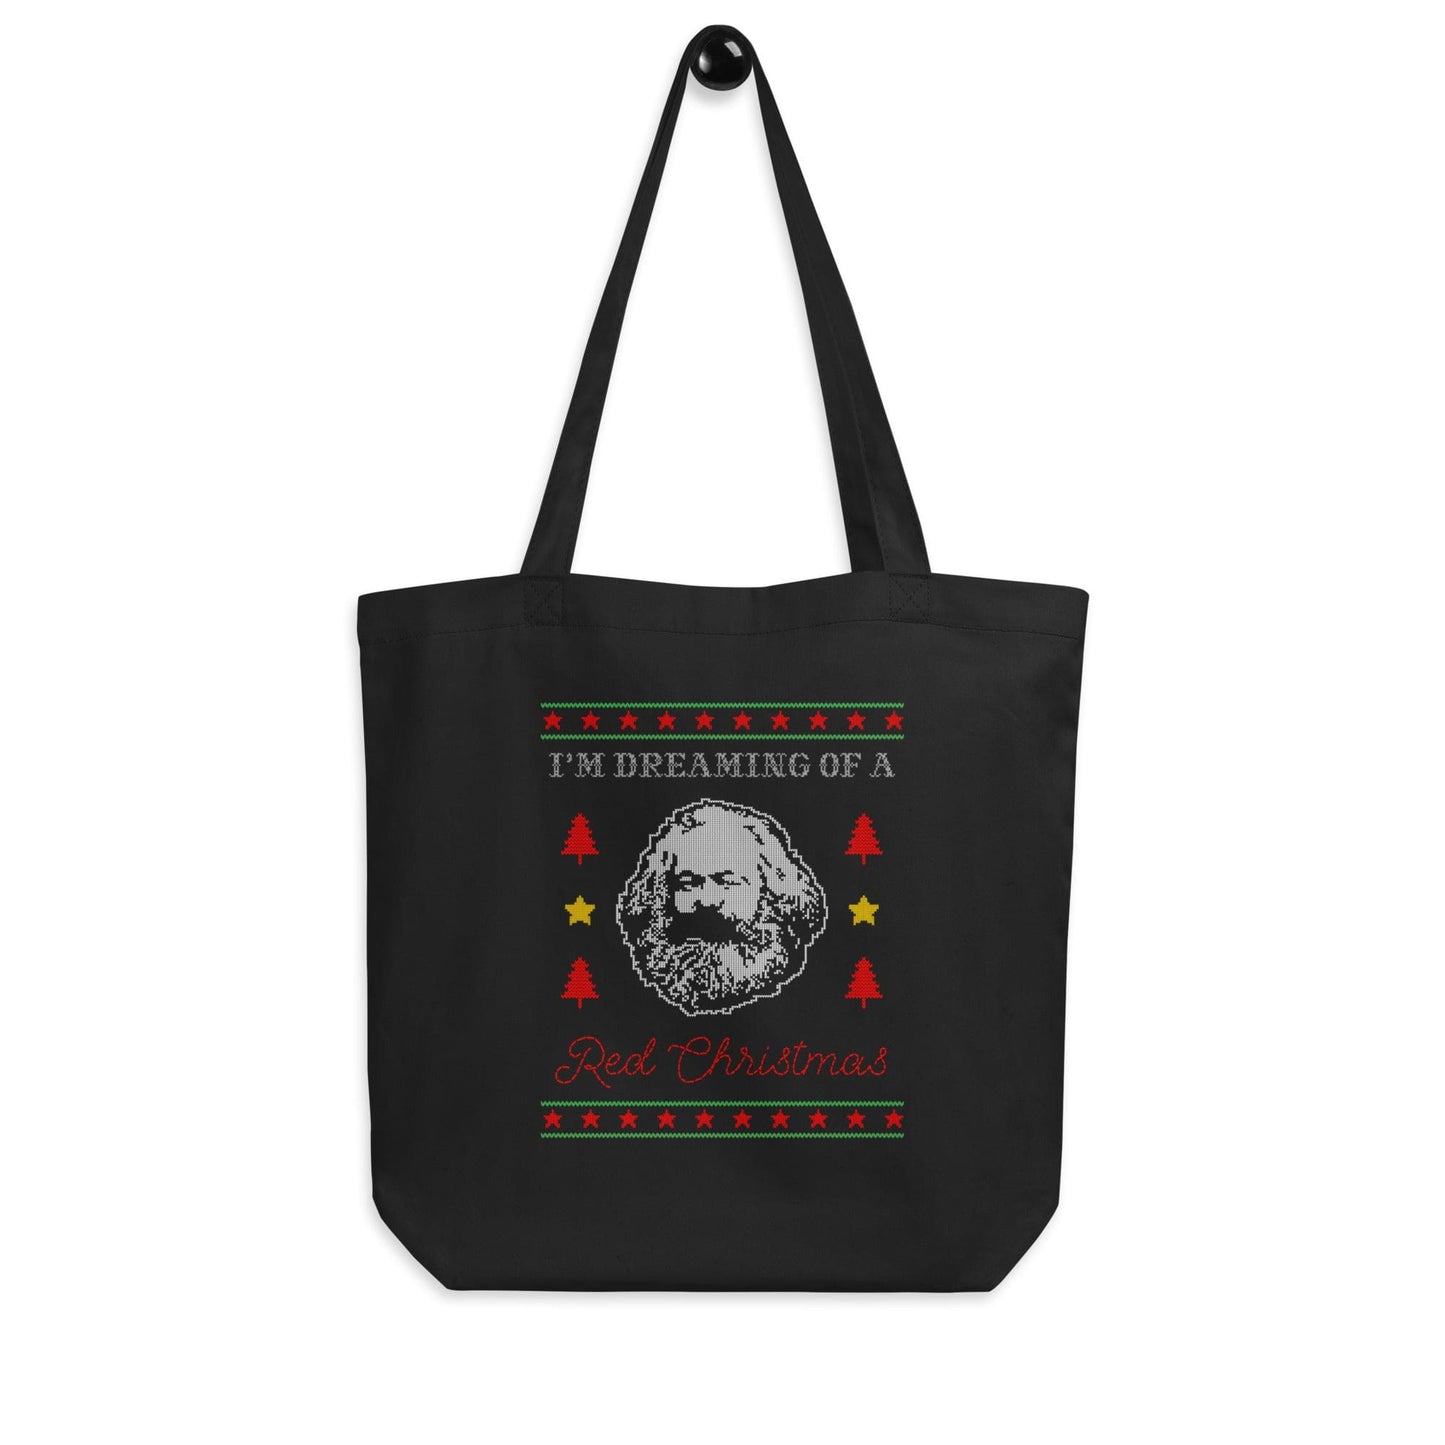 Marx: I’m dreaming of a red Christmas - Eco Tote Bag